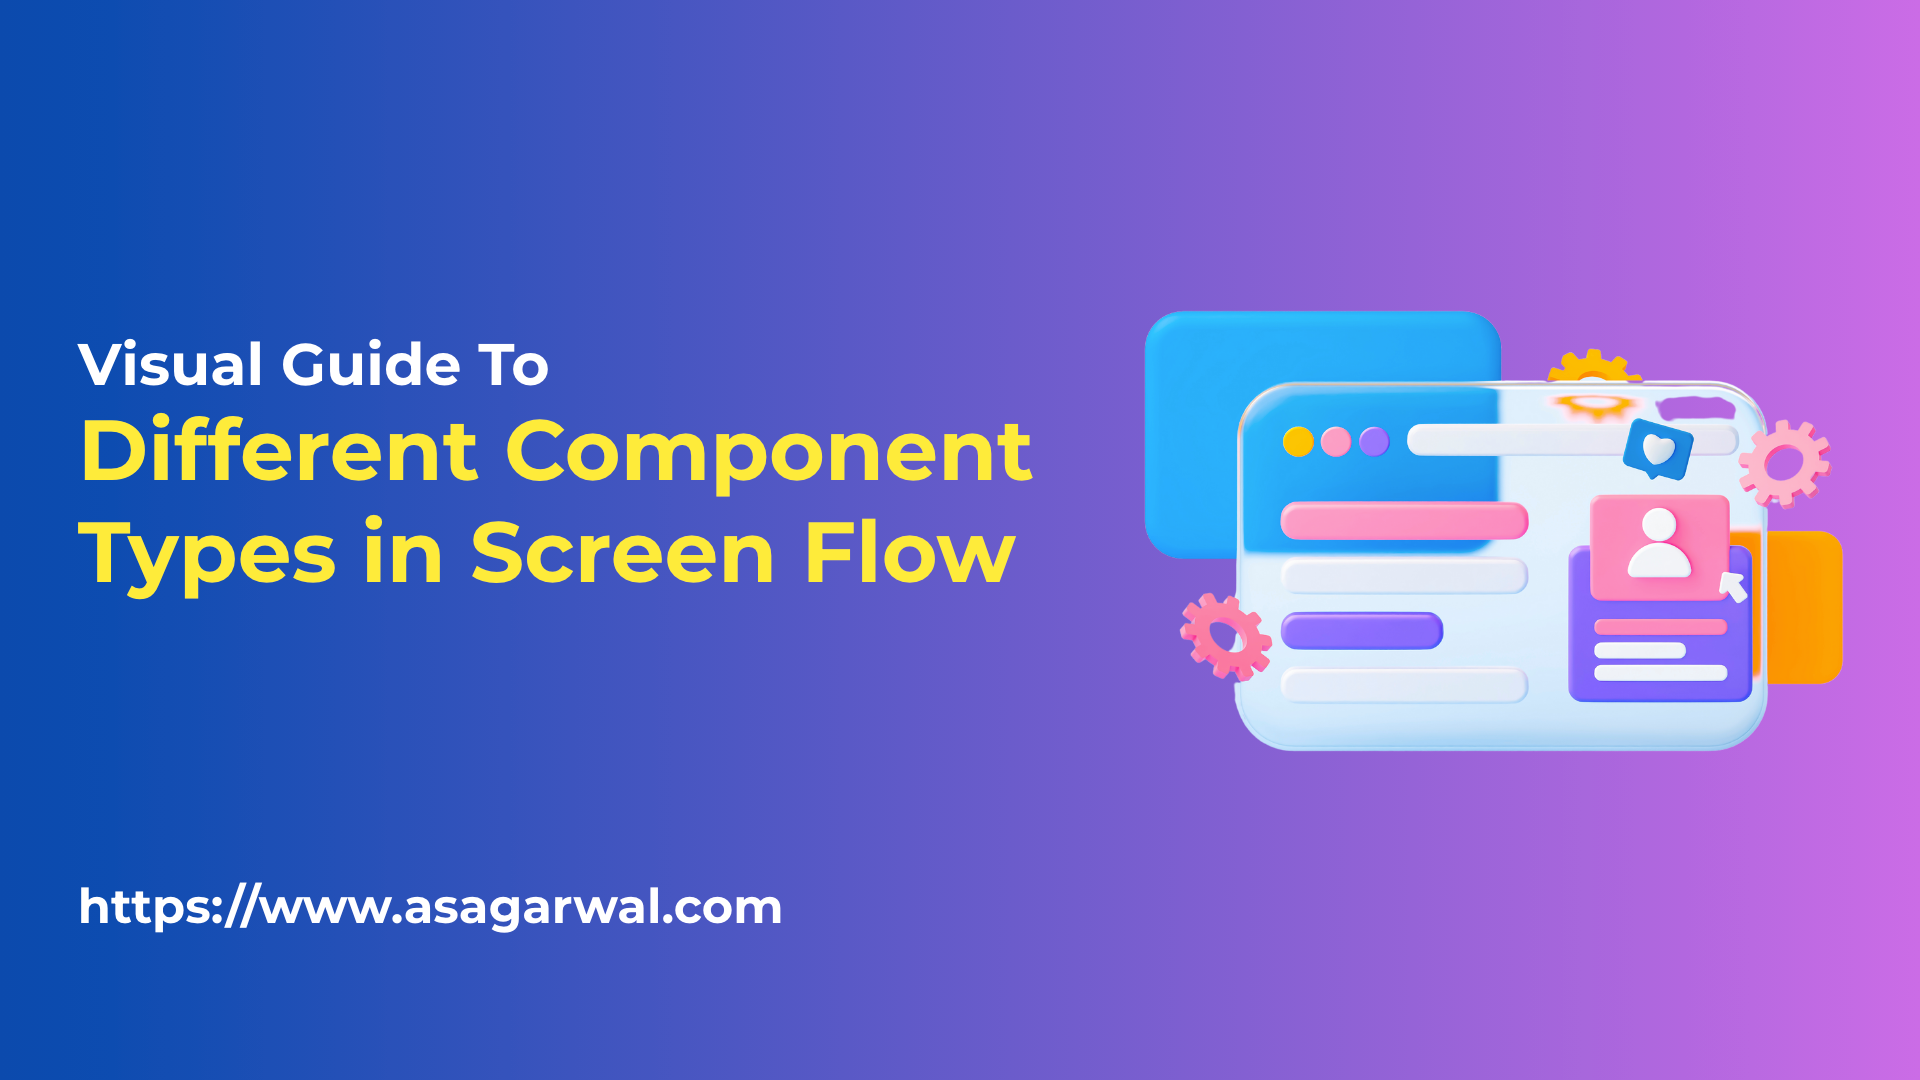 Visual Guide to Different Component Types in Screen Flow